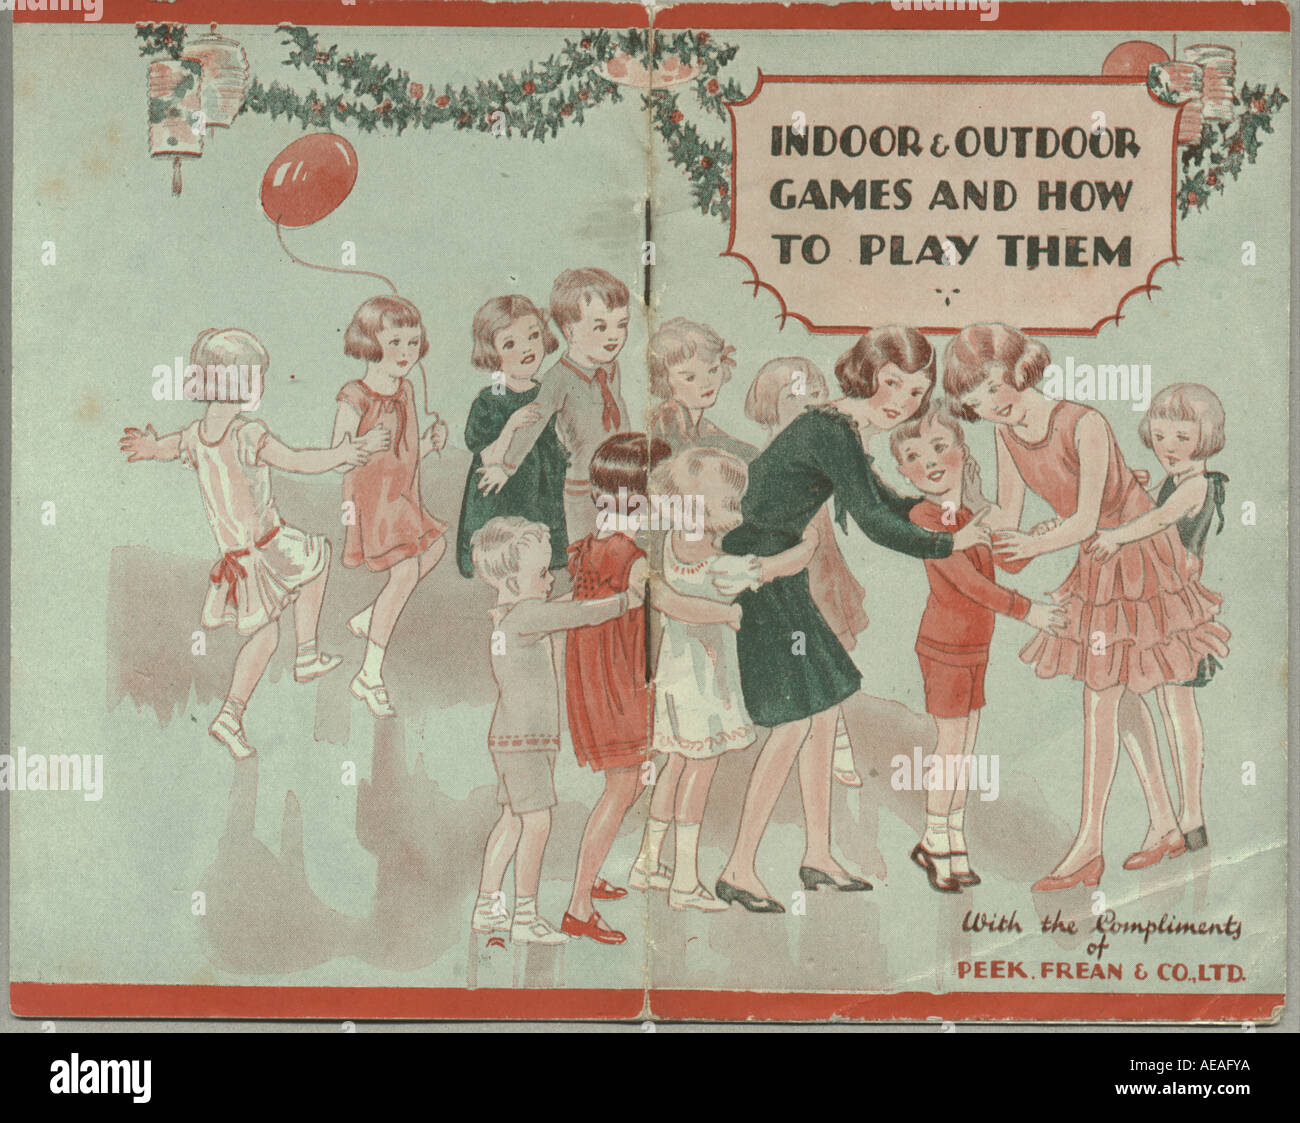 Give away booklet 'Indoor & Outdoor Games and how to play them' from Peek, Frean & Co. circa 1930 Stock Photo